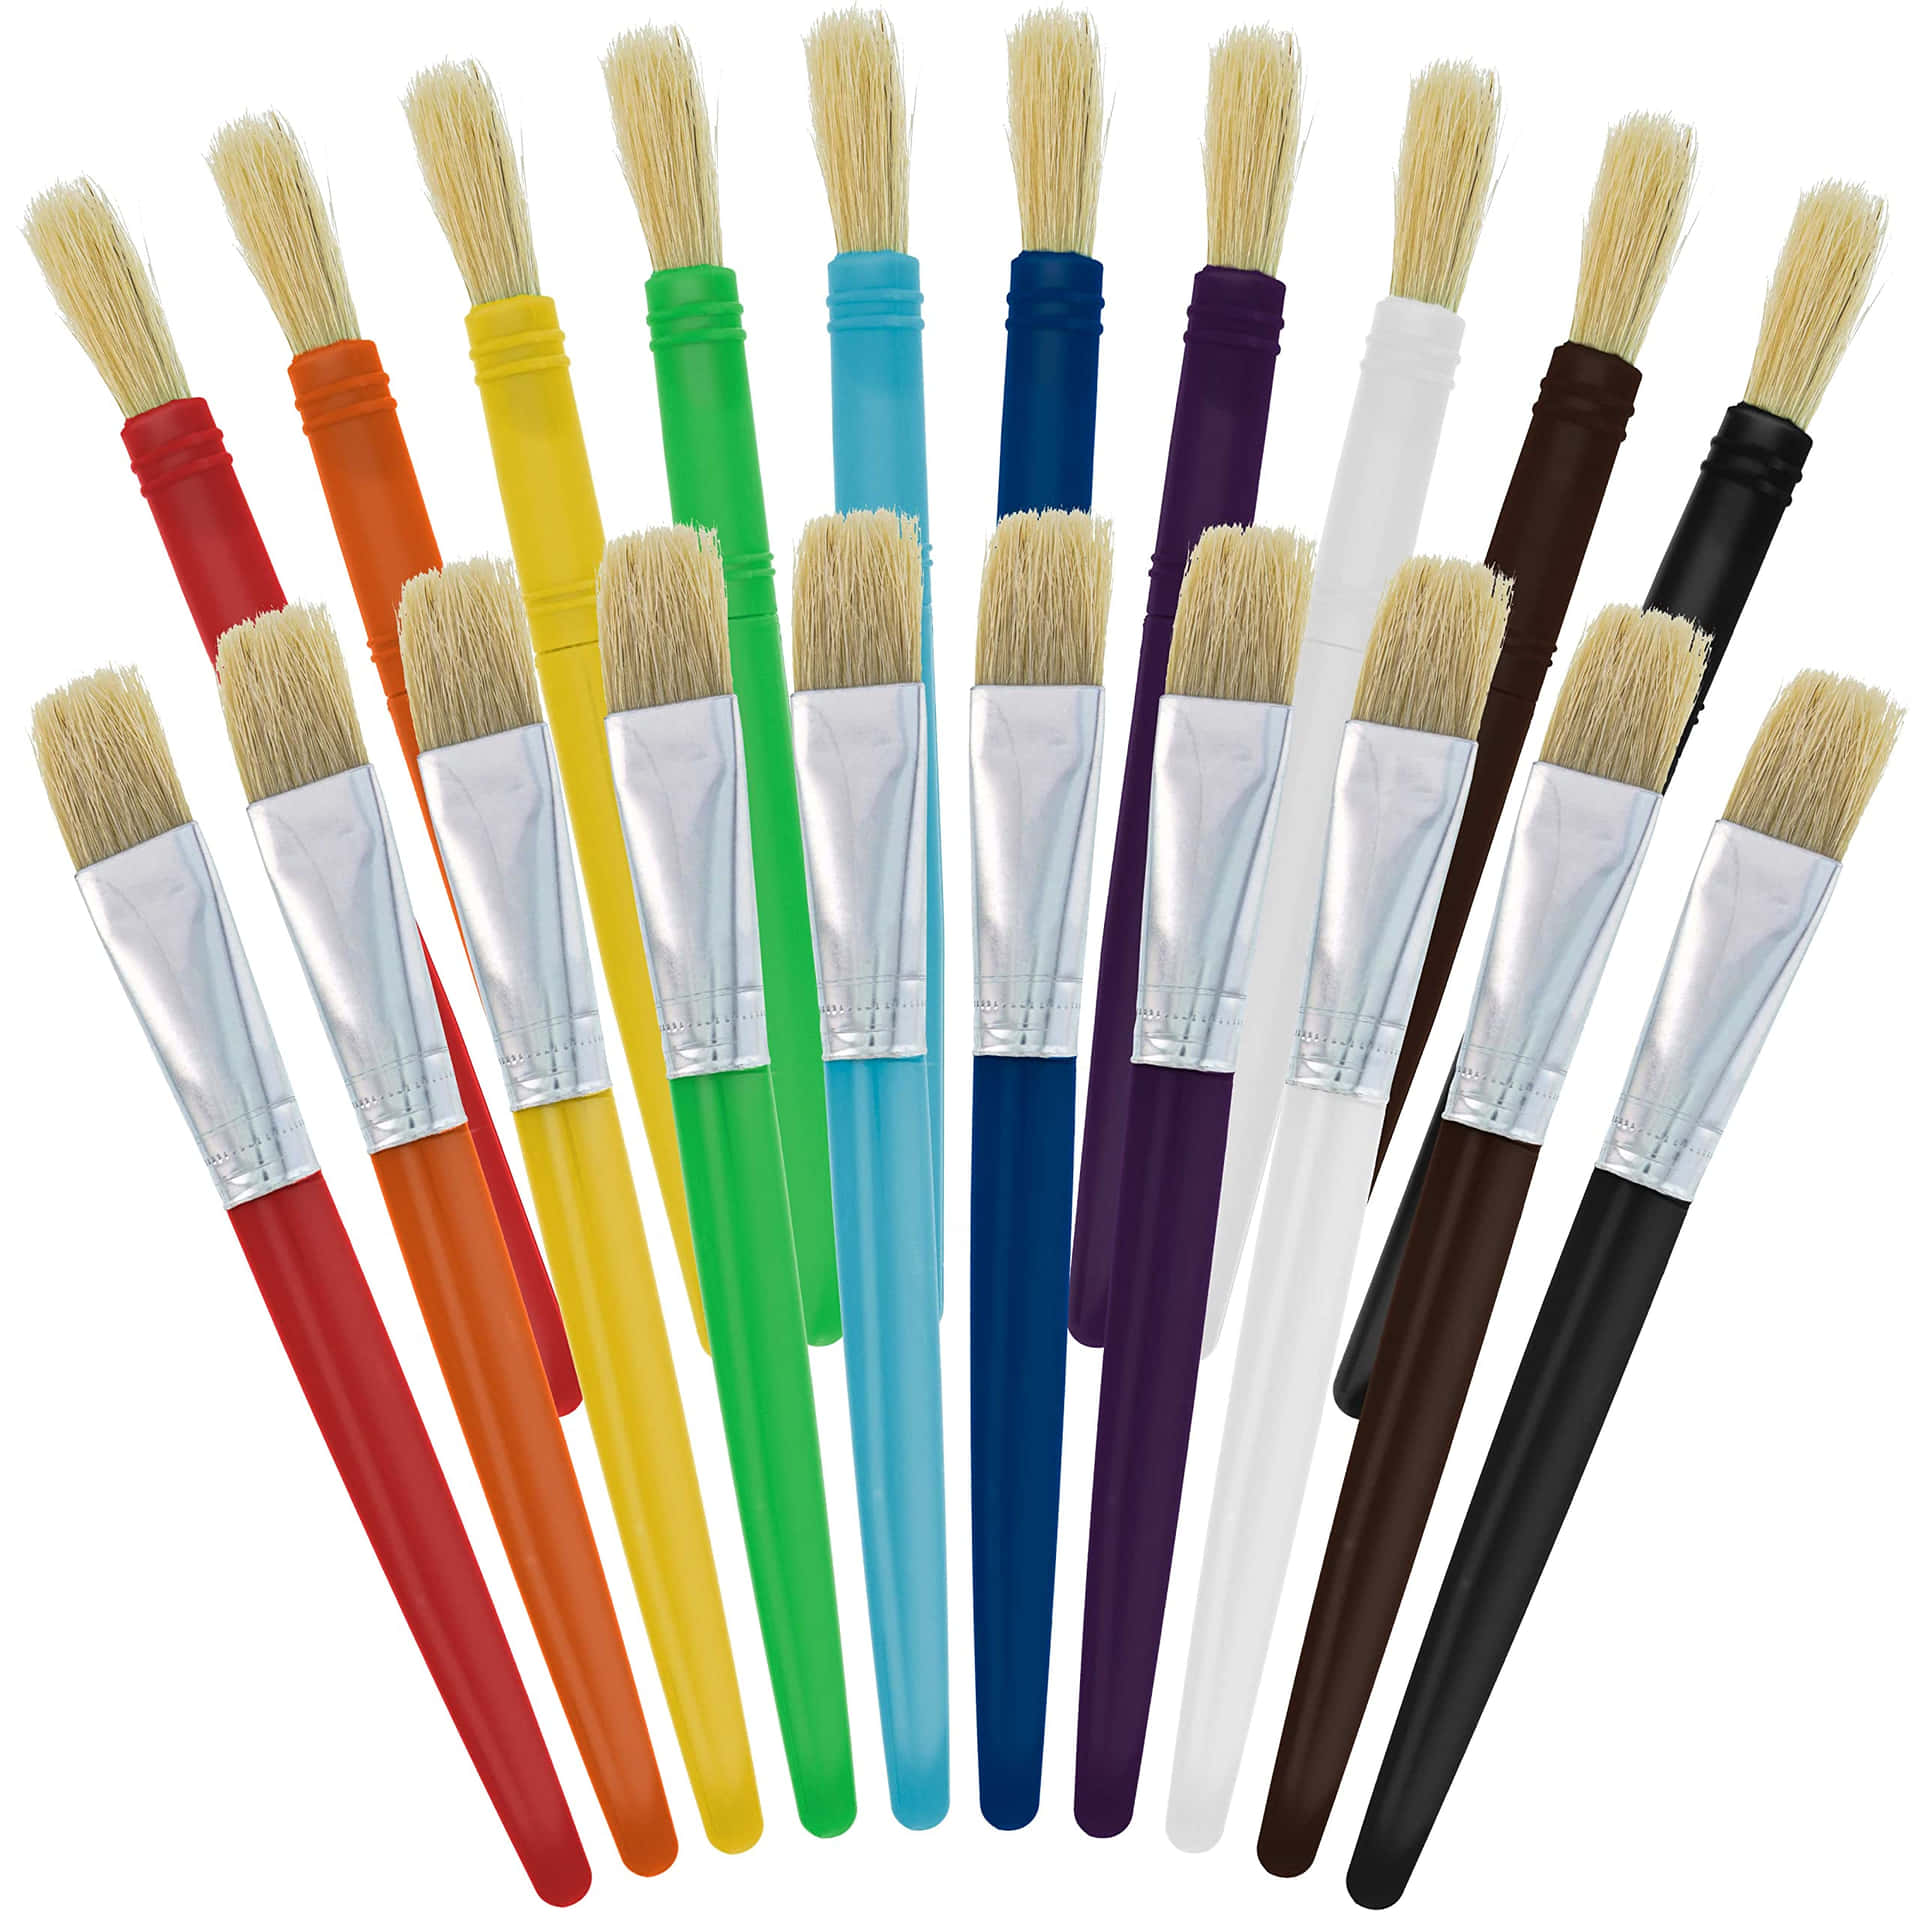 Paint your dreams with this paint brush